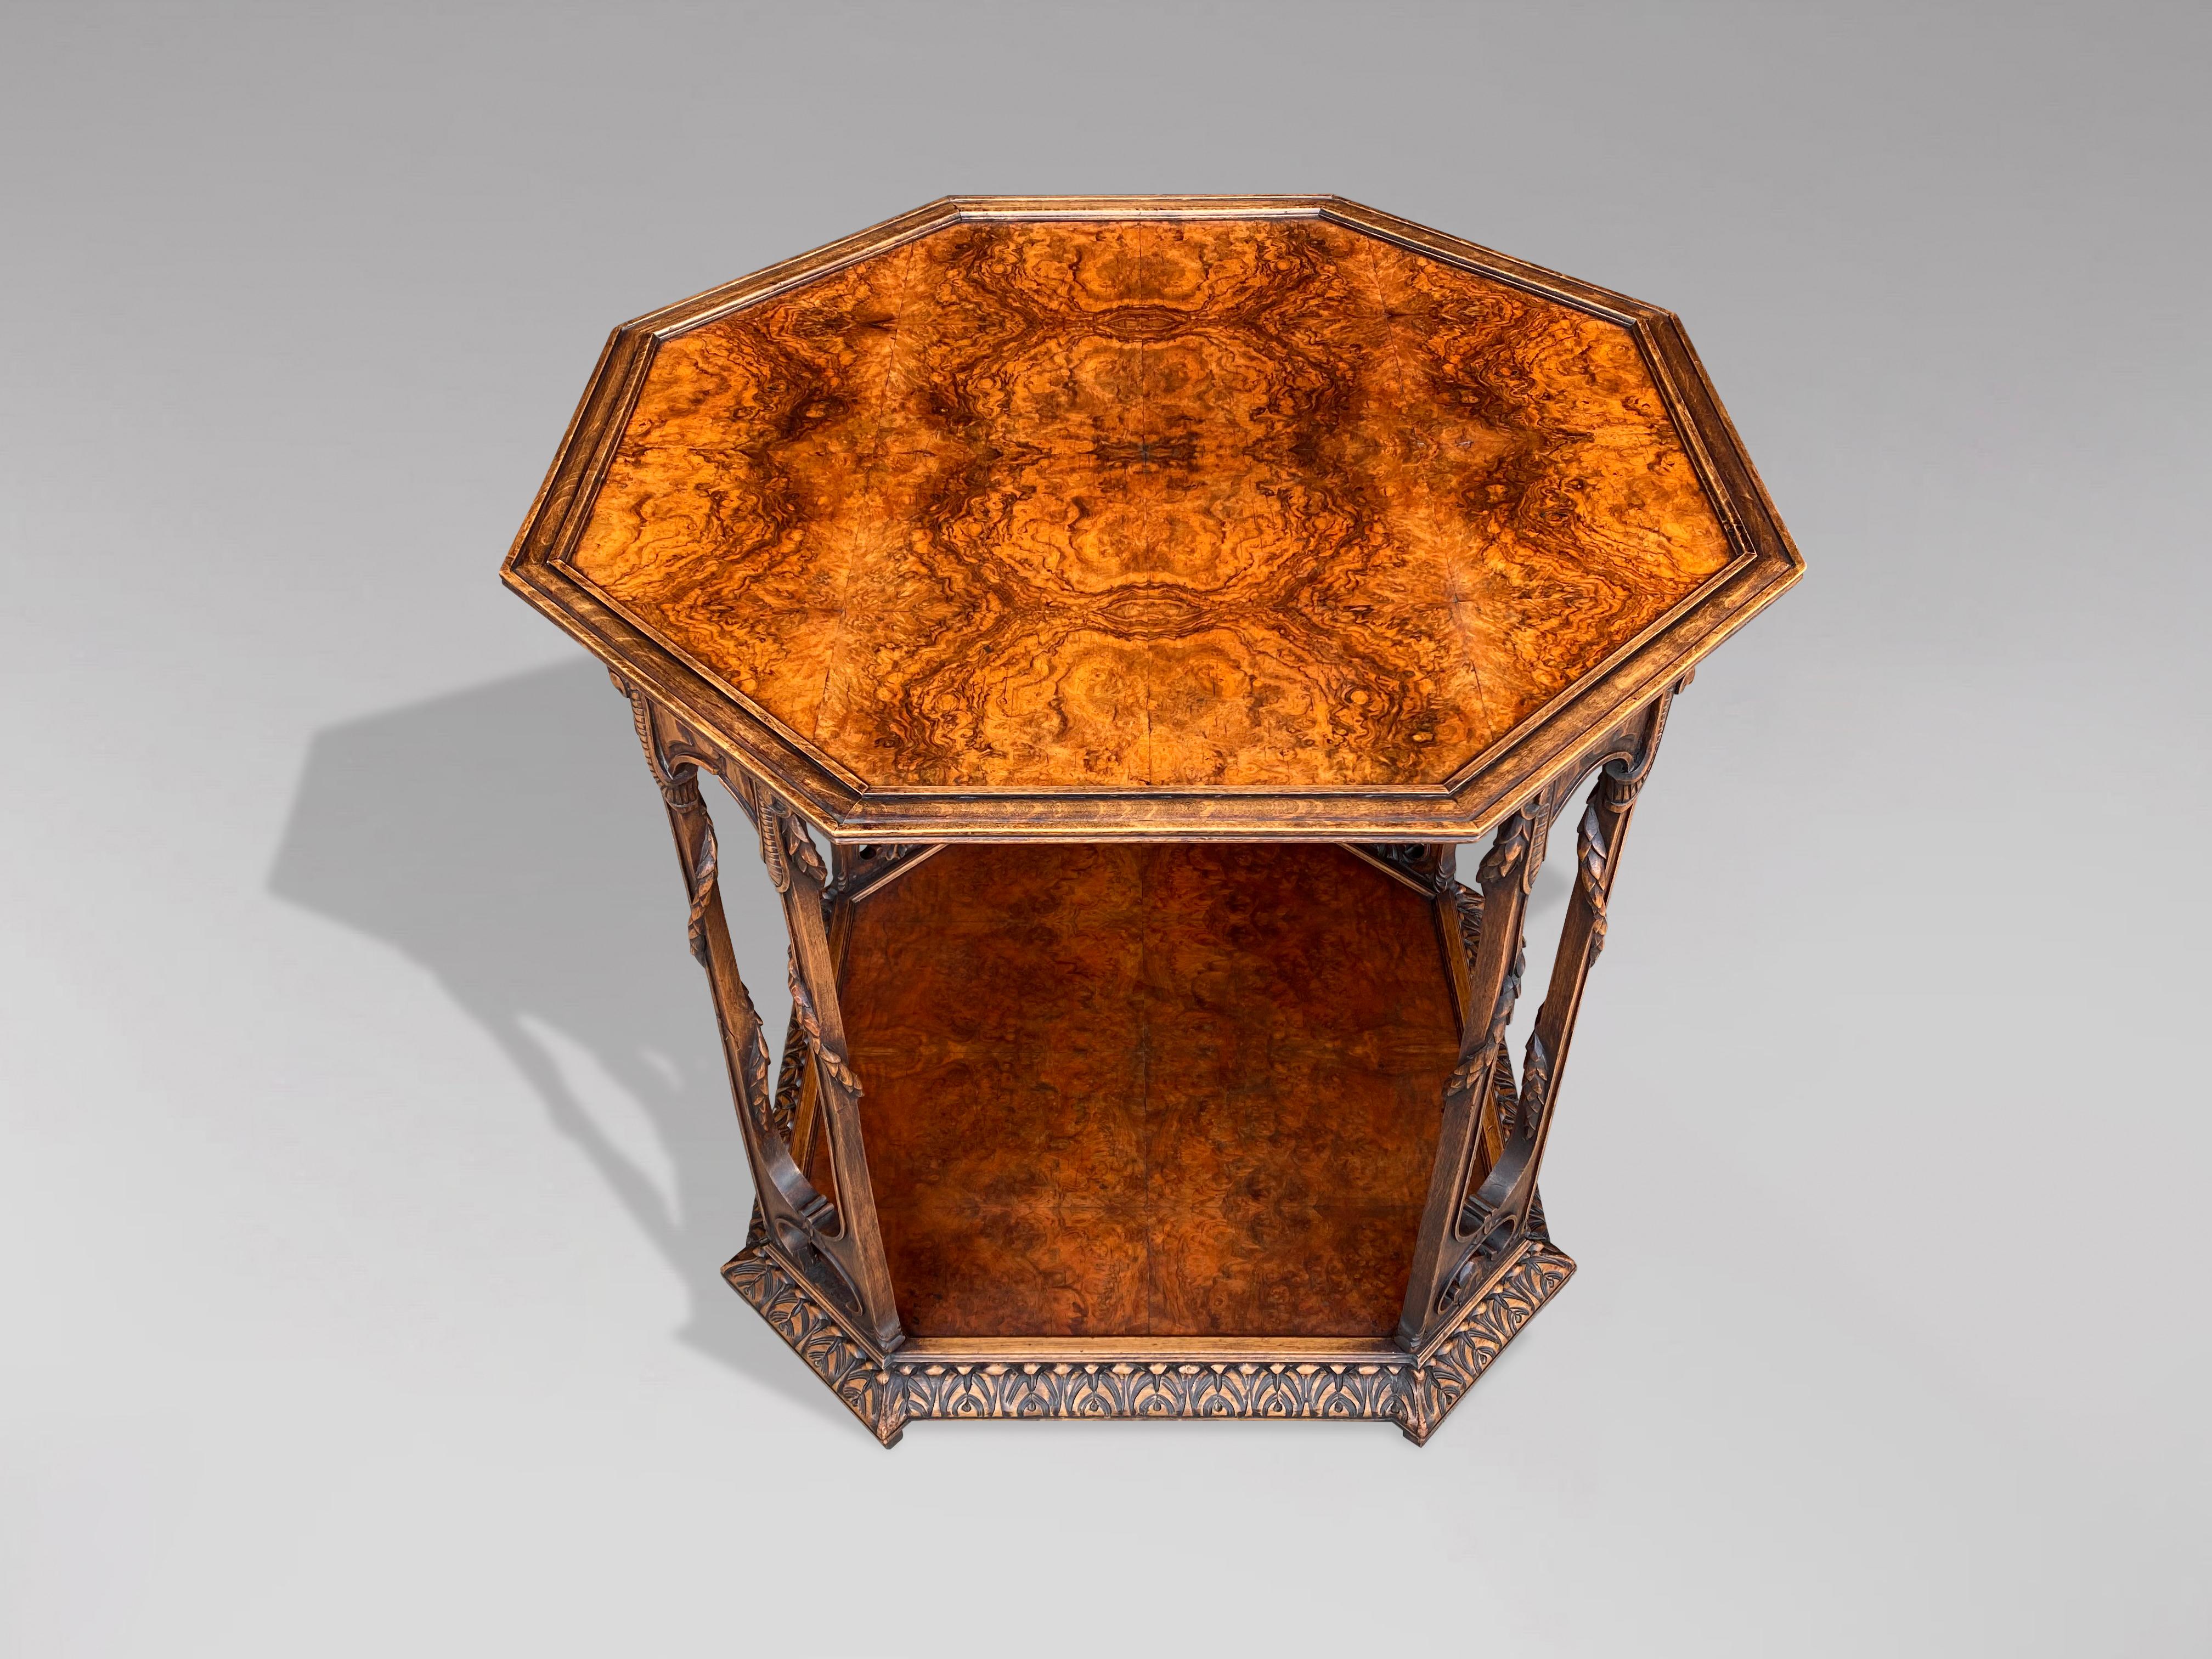 20th Century French Burr Walnut Occasional Table In Good Condition For Sale In Petworth,West Sussex, GB